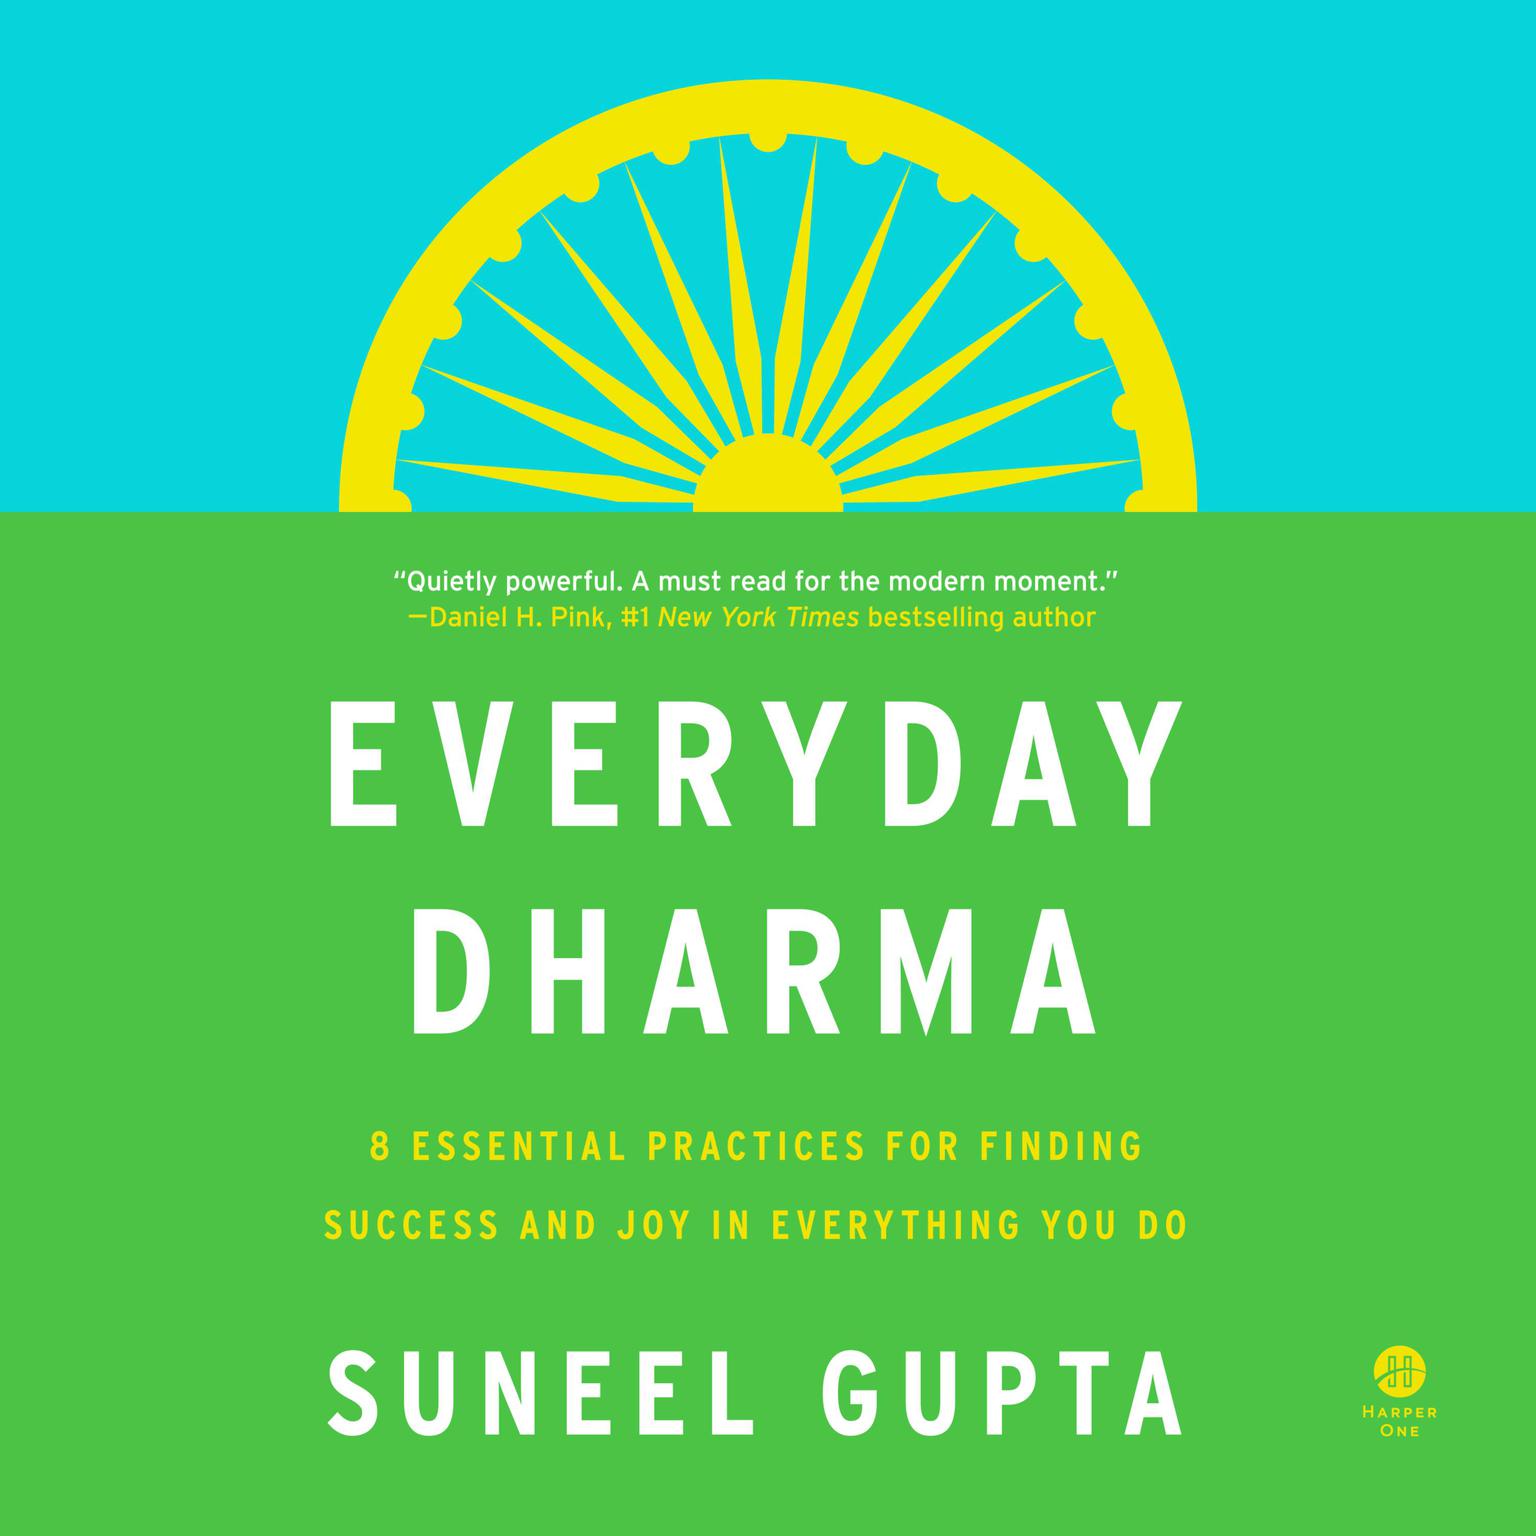 Everyday Dharma: 8 Essential Practices for Finding Success and Joy in Everything You Do Audiobook, by Suneel Gupta